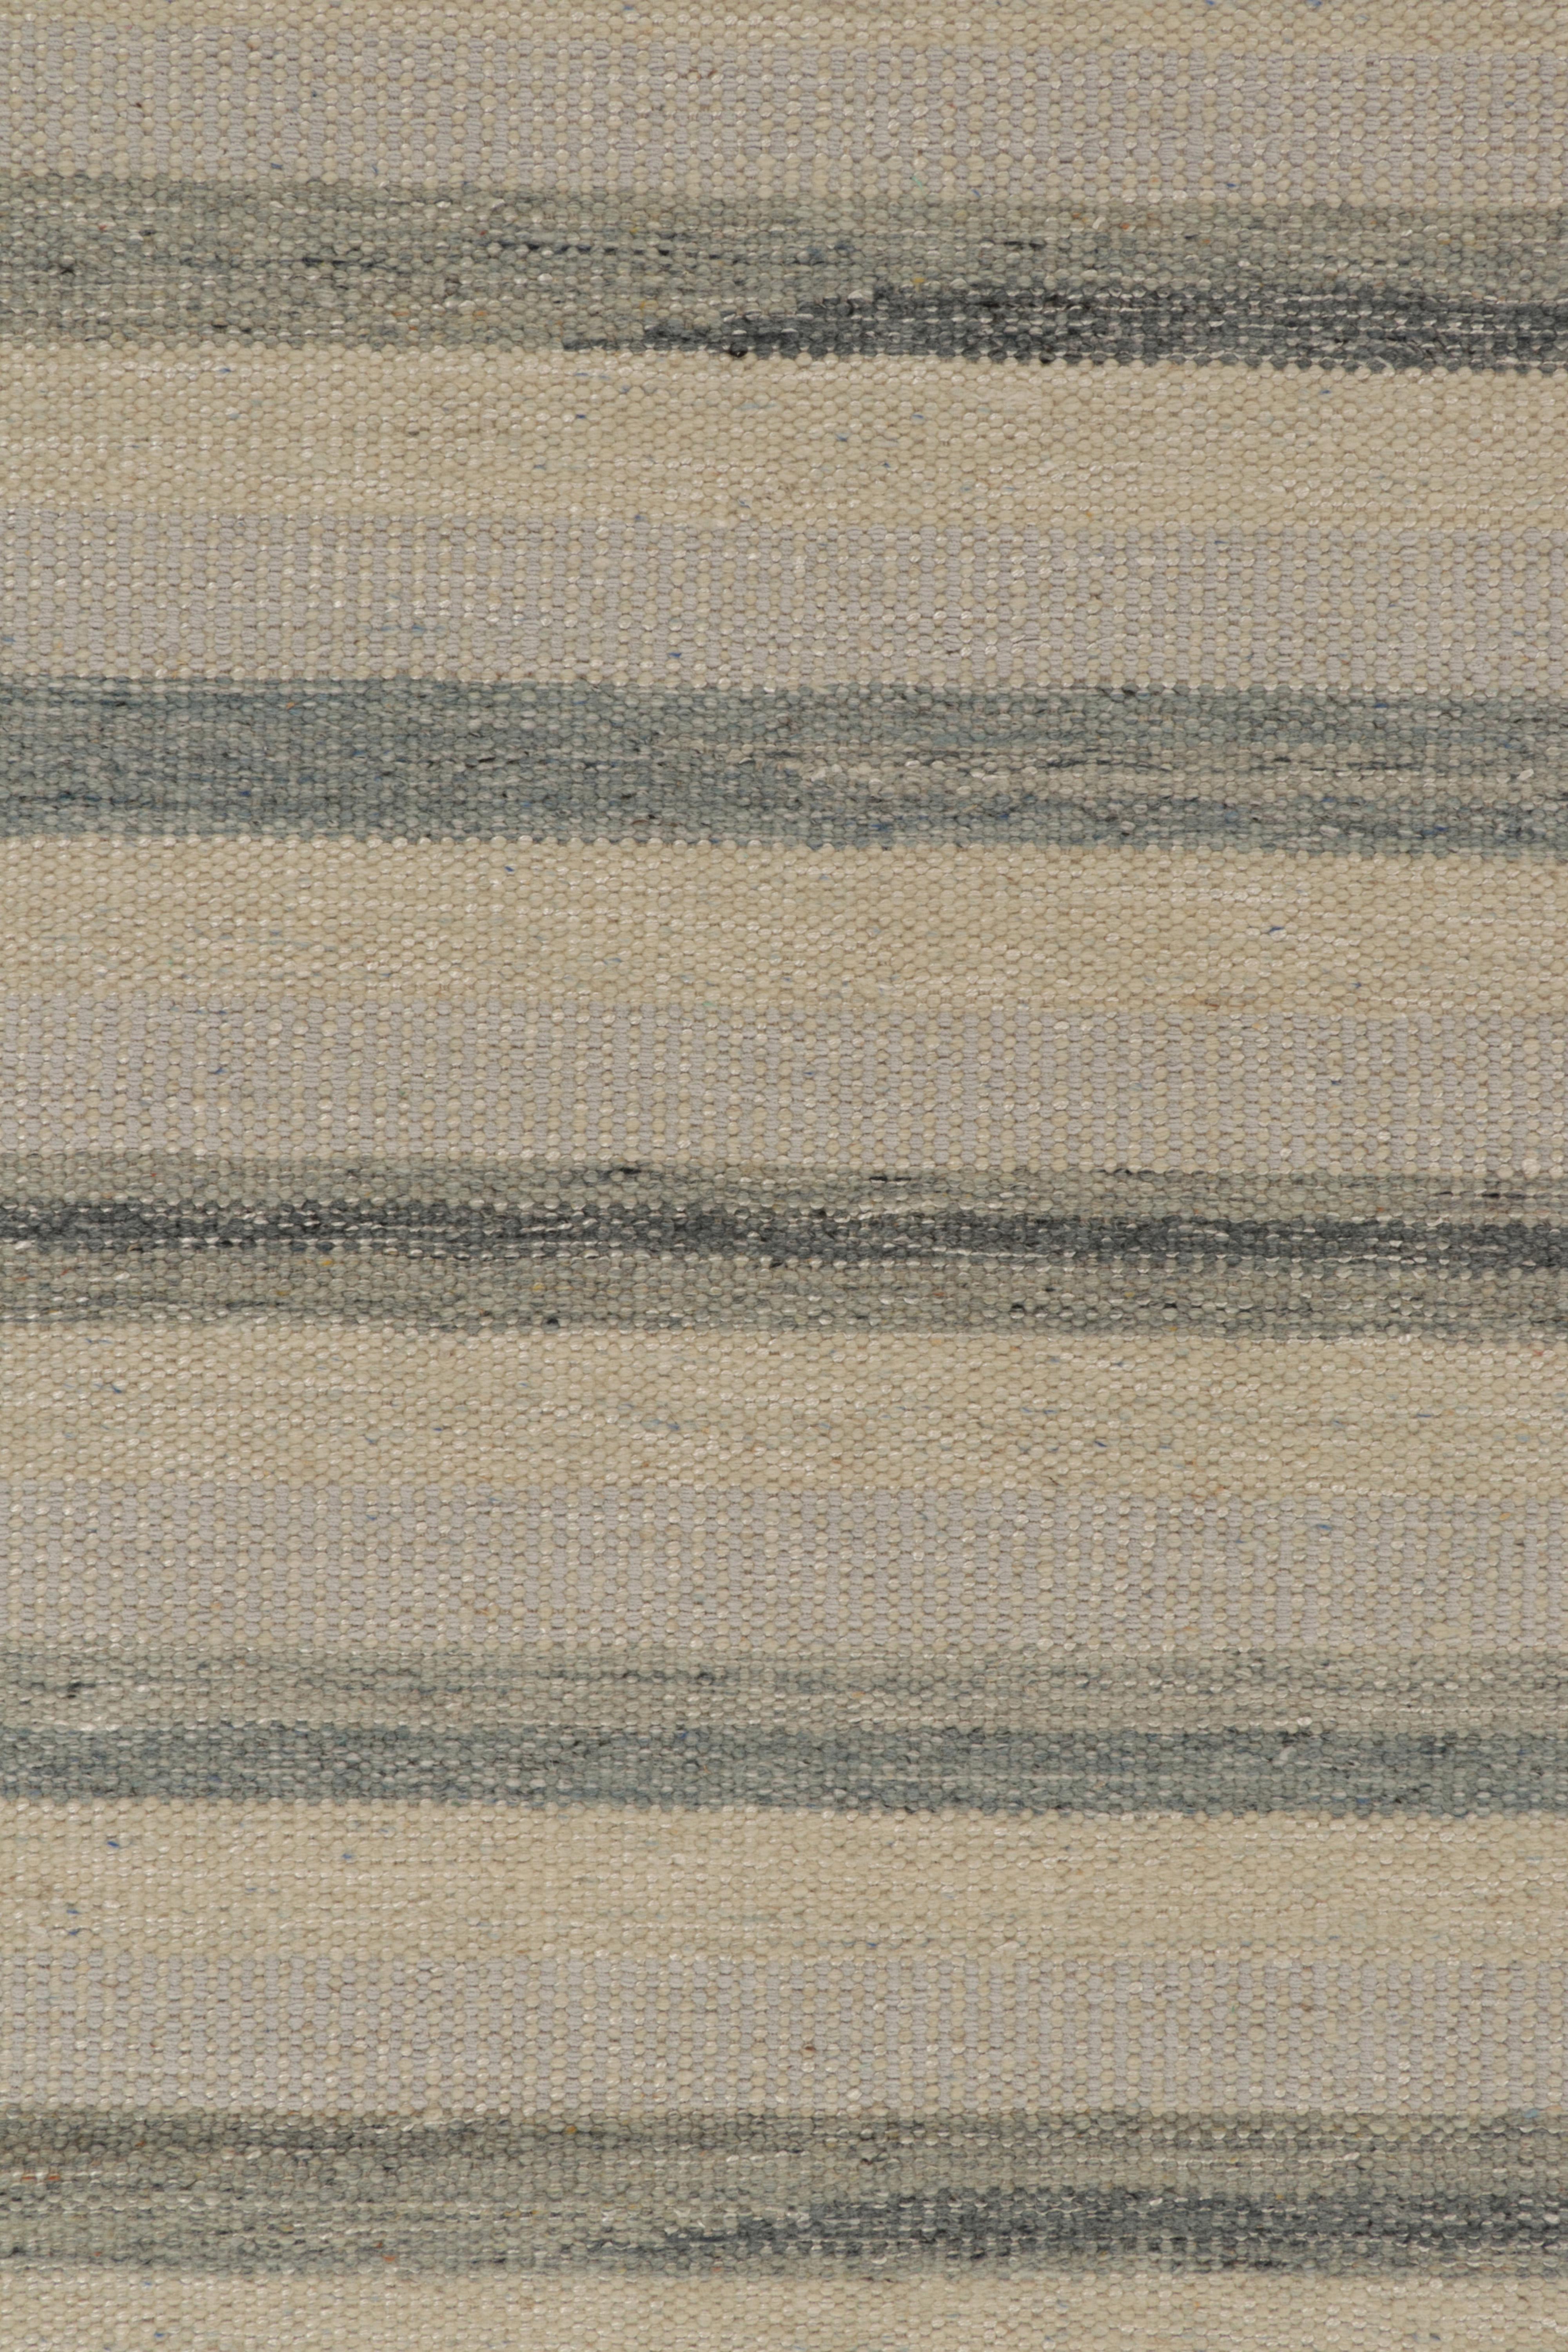 Rug & Kilim’s Scandinavian Style Kilim in Off-White, Blue and Gray Stripes In New Condition For Sale In Long Island City, NY